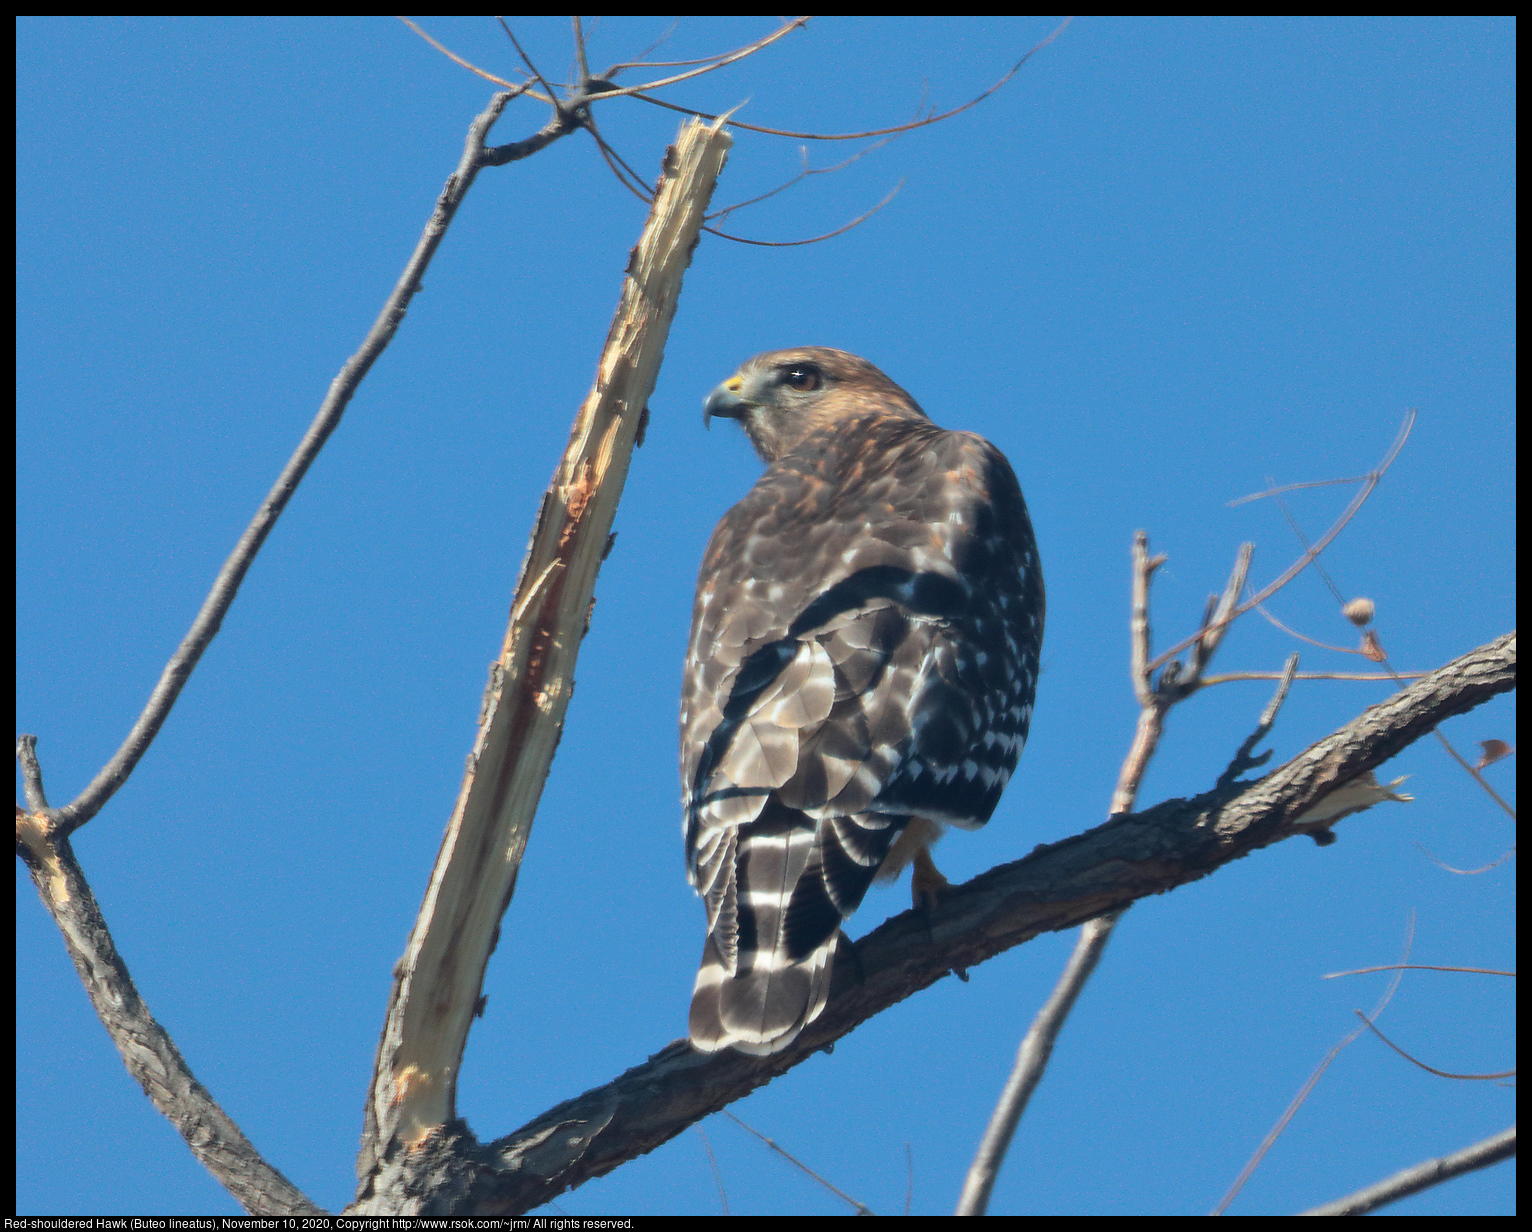 Red-shouldered Hawk (Buteo lineatus), November 10, 2020